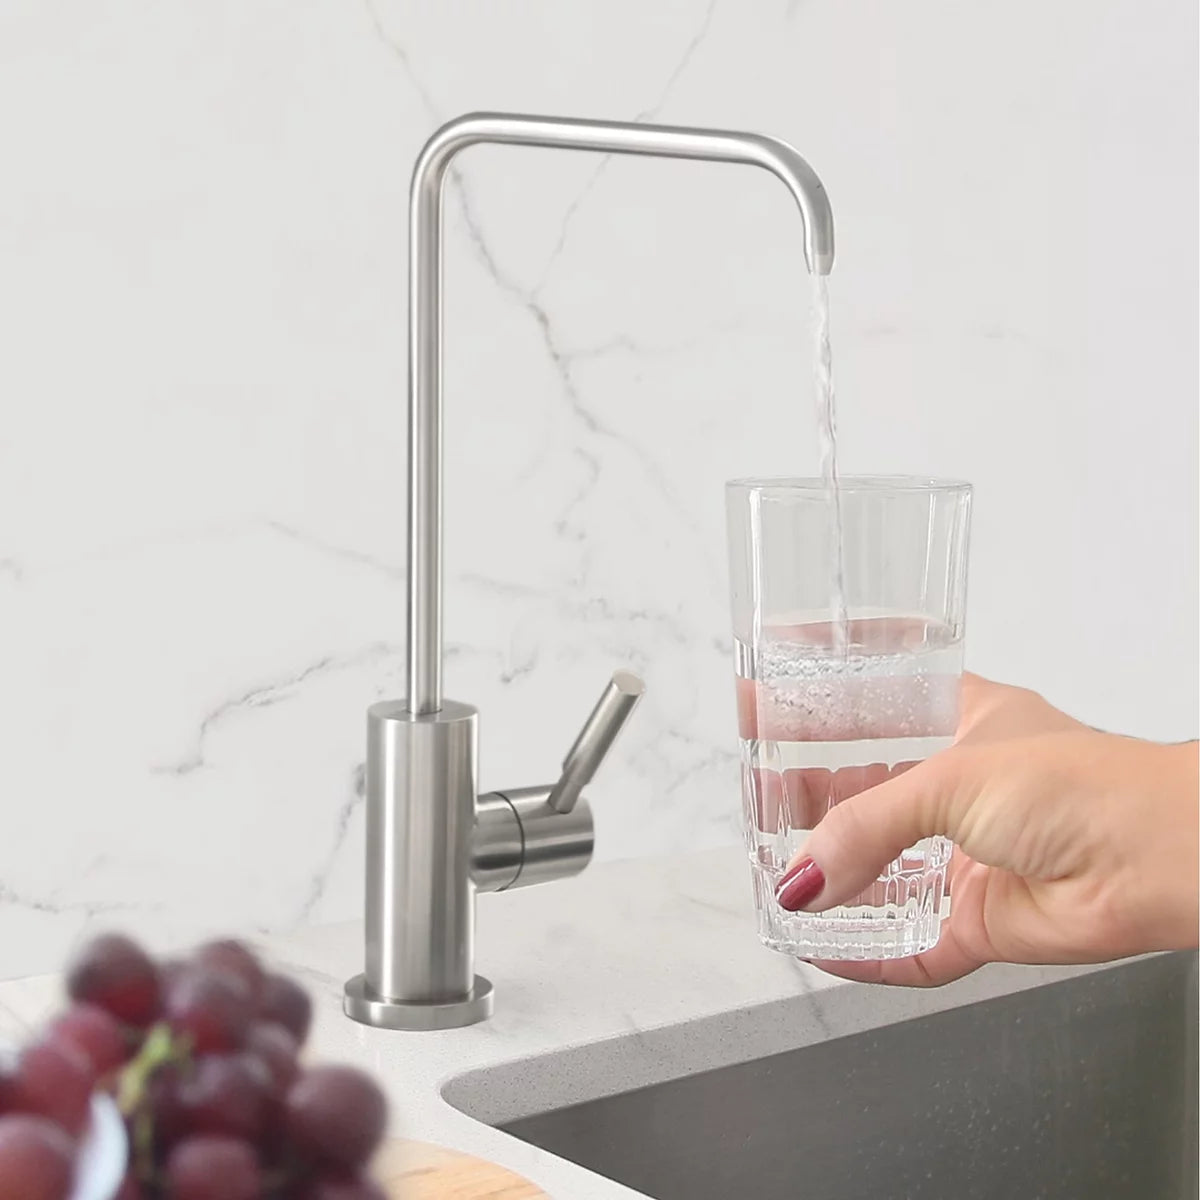 Stylish Melfi Single Handle Cold Water Tap - Stainless Steel Finish K-147S